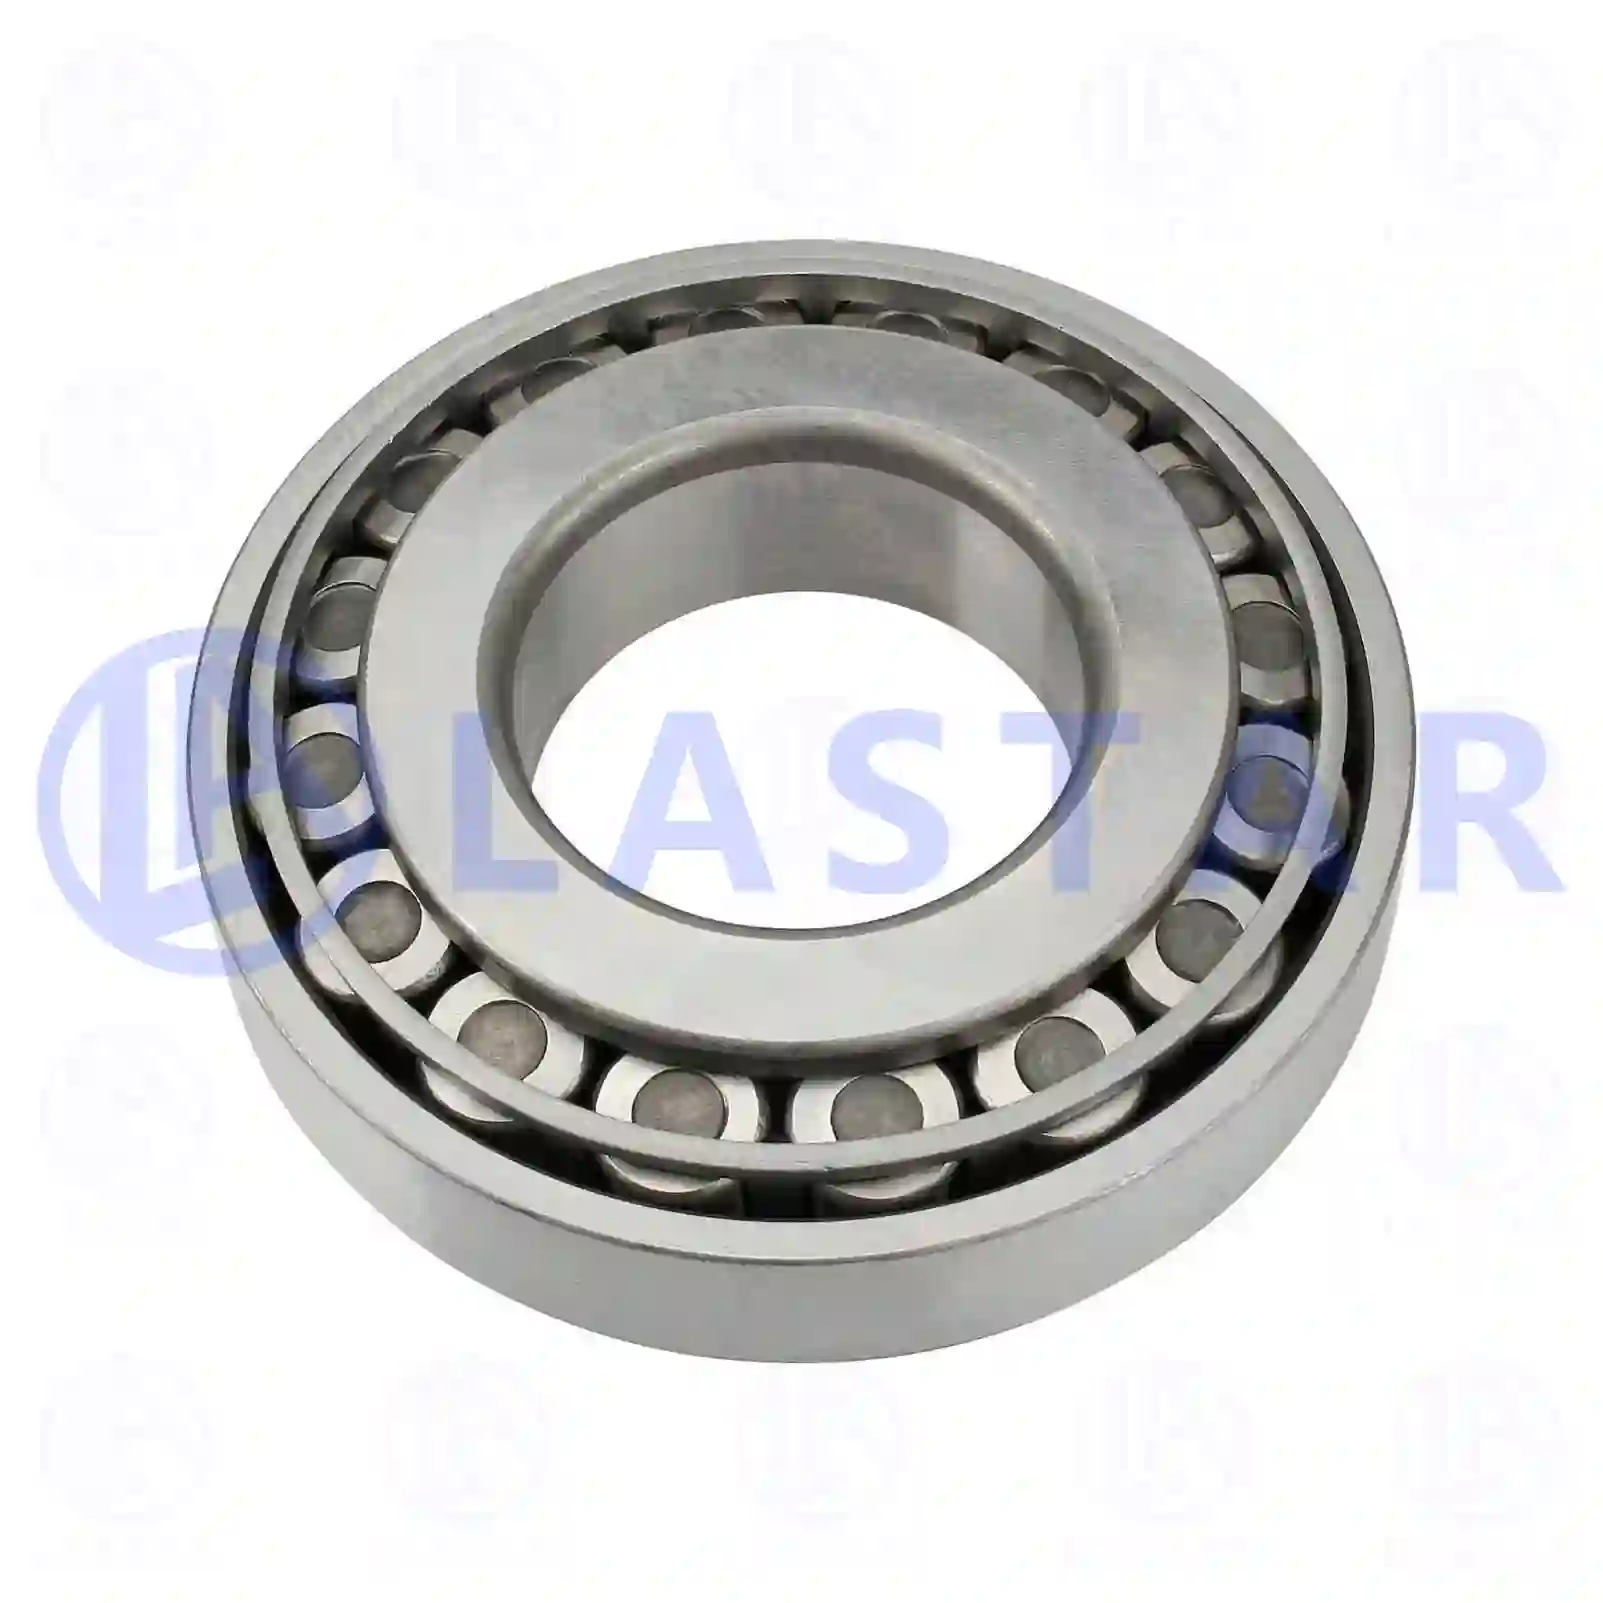 Tapered roller bearing, 77725194, 0264026000, 01102859, 94031454, 1-09812013-0, 1-09812023-0, 1-09812070-0, 01102859, 01109985, 06324890113, 0009810505, 0009818905, 0019819705, 0019899705, 0029810205, 0029816005, 0039816205, 0069816505, 0089818805, 0109810005, 0109812805, 0109812905, 0109815505, 0129818805, 0129819205, 0129819405, 0139818405, 0169811205, 3449817005, MH043008, 38326-90002, 40208-90009, 4200001500, 1357711, 366305, ZG02968-0008 ||  77725194 Lastar Spare Part | Truck Spare Parts, Auotomotive Spare Parts Tapered roller bearing, 77725194, 0264026000, 01102859, 94031454, 1-09812013-0, 1-09812023-0, 1-09812070-0, 01102859, 01109985, 06324890113, 0009810505, 0009818905, 0019819705, 0019899705, 0029810205, 0029816005, 0039816205, 0069816505, 0089818805, 0109810005, 0109812805, 0109812905, 0109815505, 0129818805, 0129819205, 0129819405, 0139818405, 0169811205, 3449817005, MH043008, 38326-90002, 40208-90009, 4200001500, 1357711, 366305, ZG02968-0008 ||  77725194 Lastar Spare Part | Truck Spare Parts, Auotomotive Spare Parts